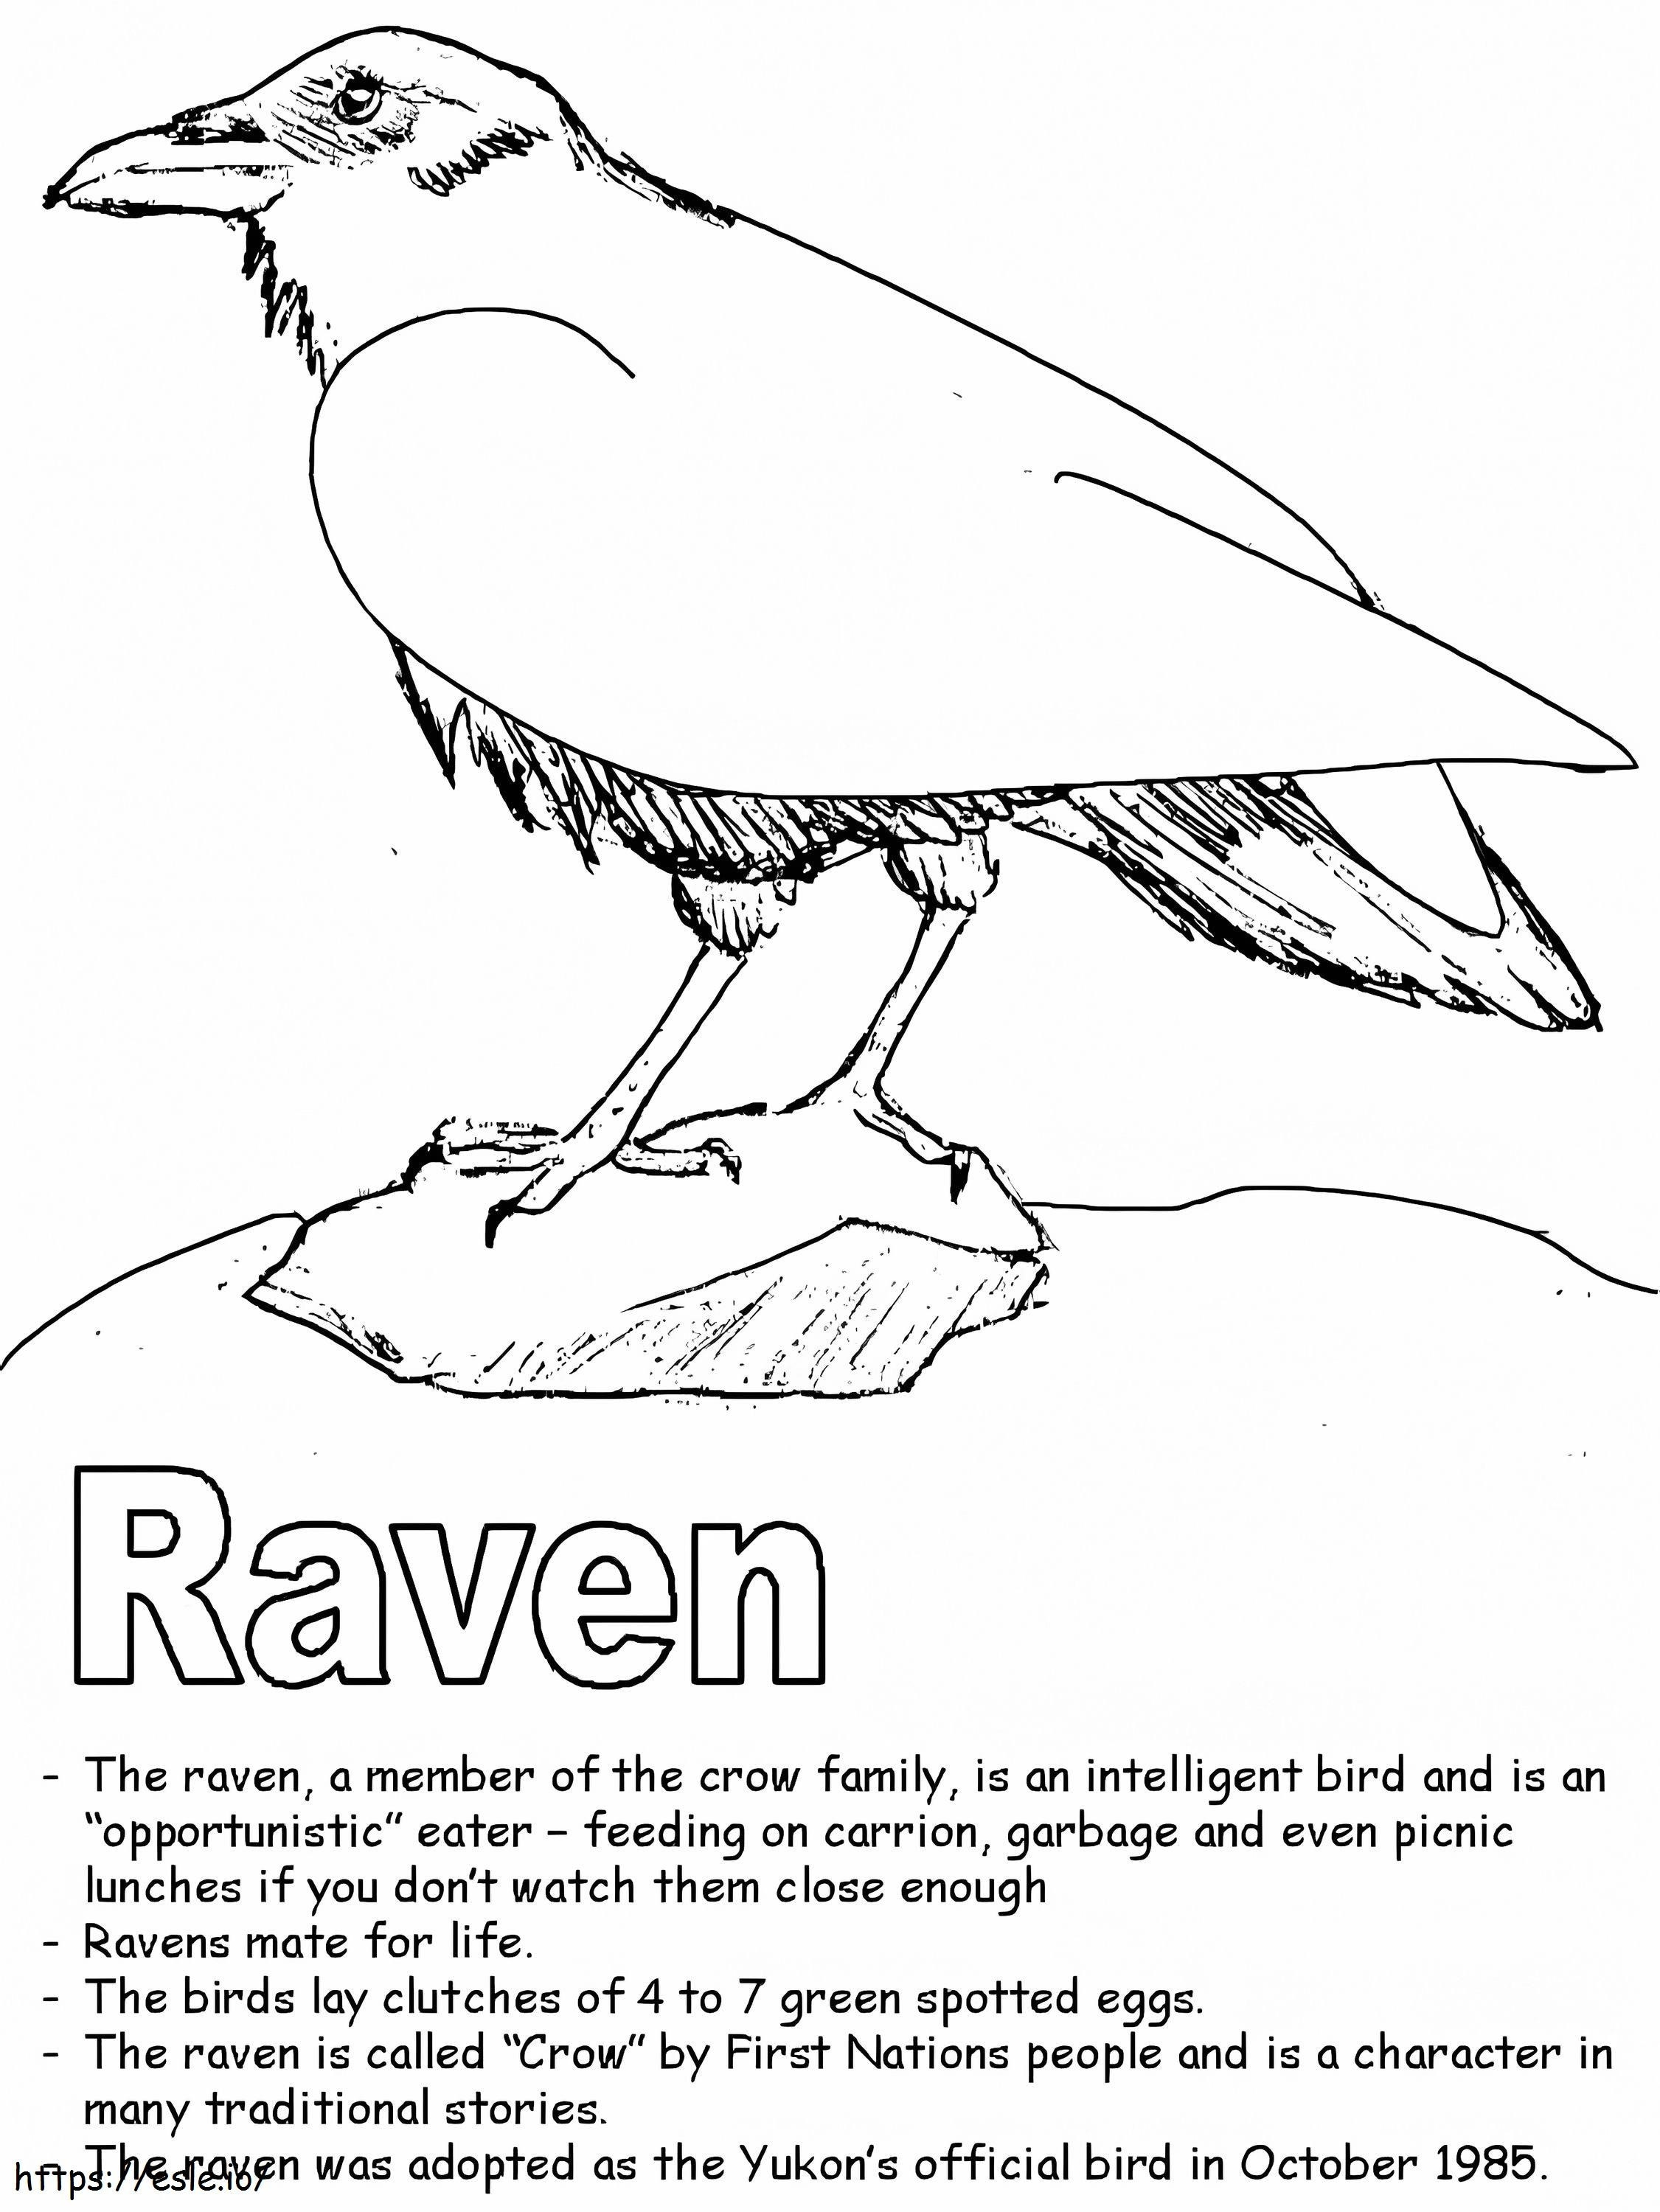 Raven 3 coloring page